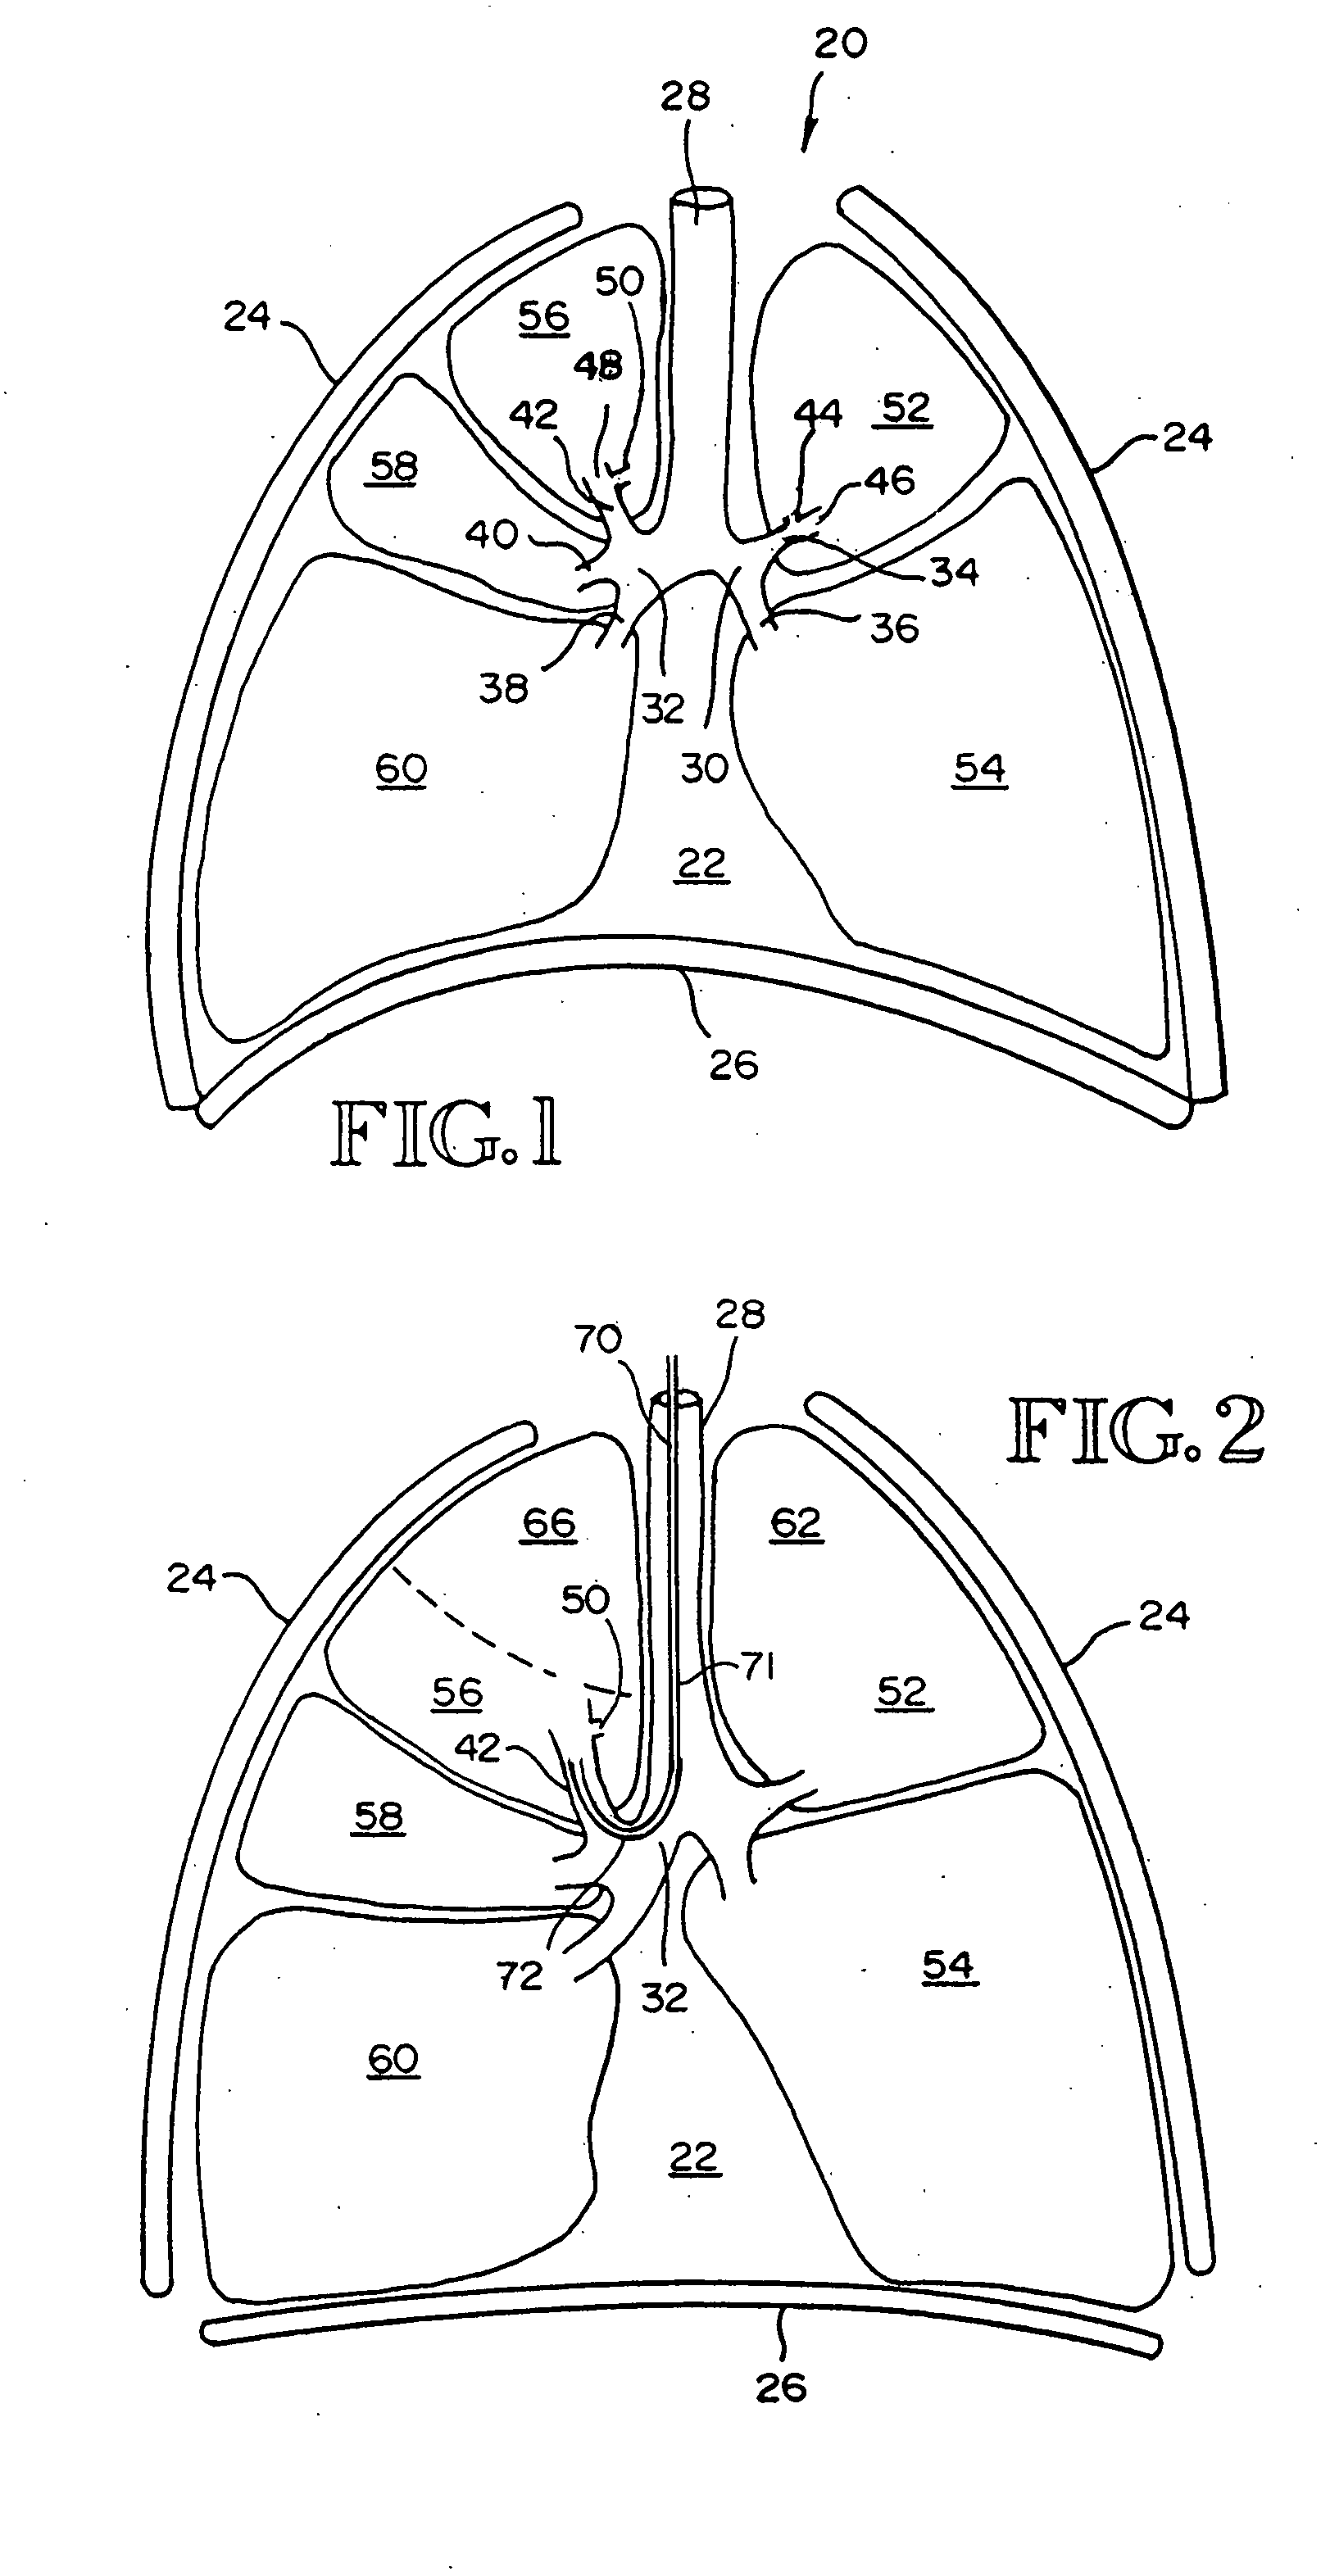 Intra-bronchial valve devices